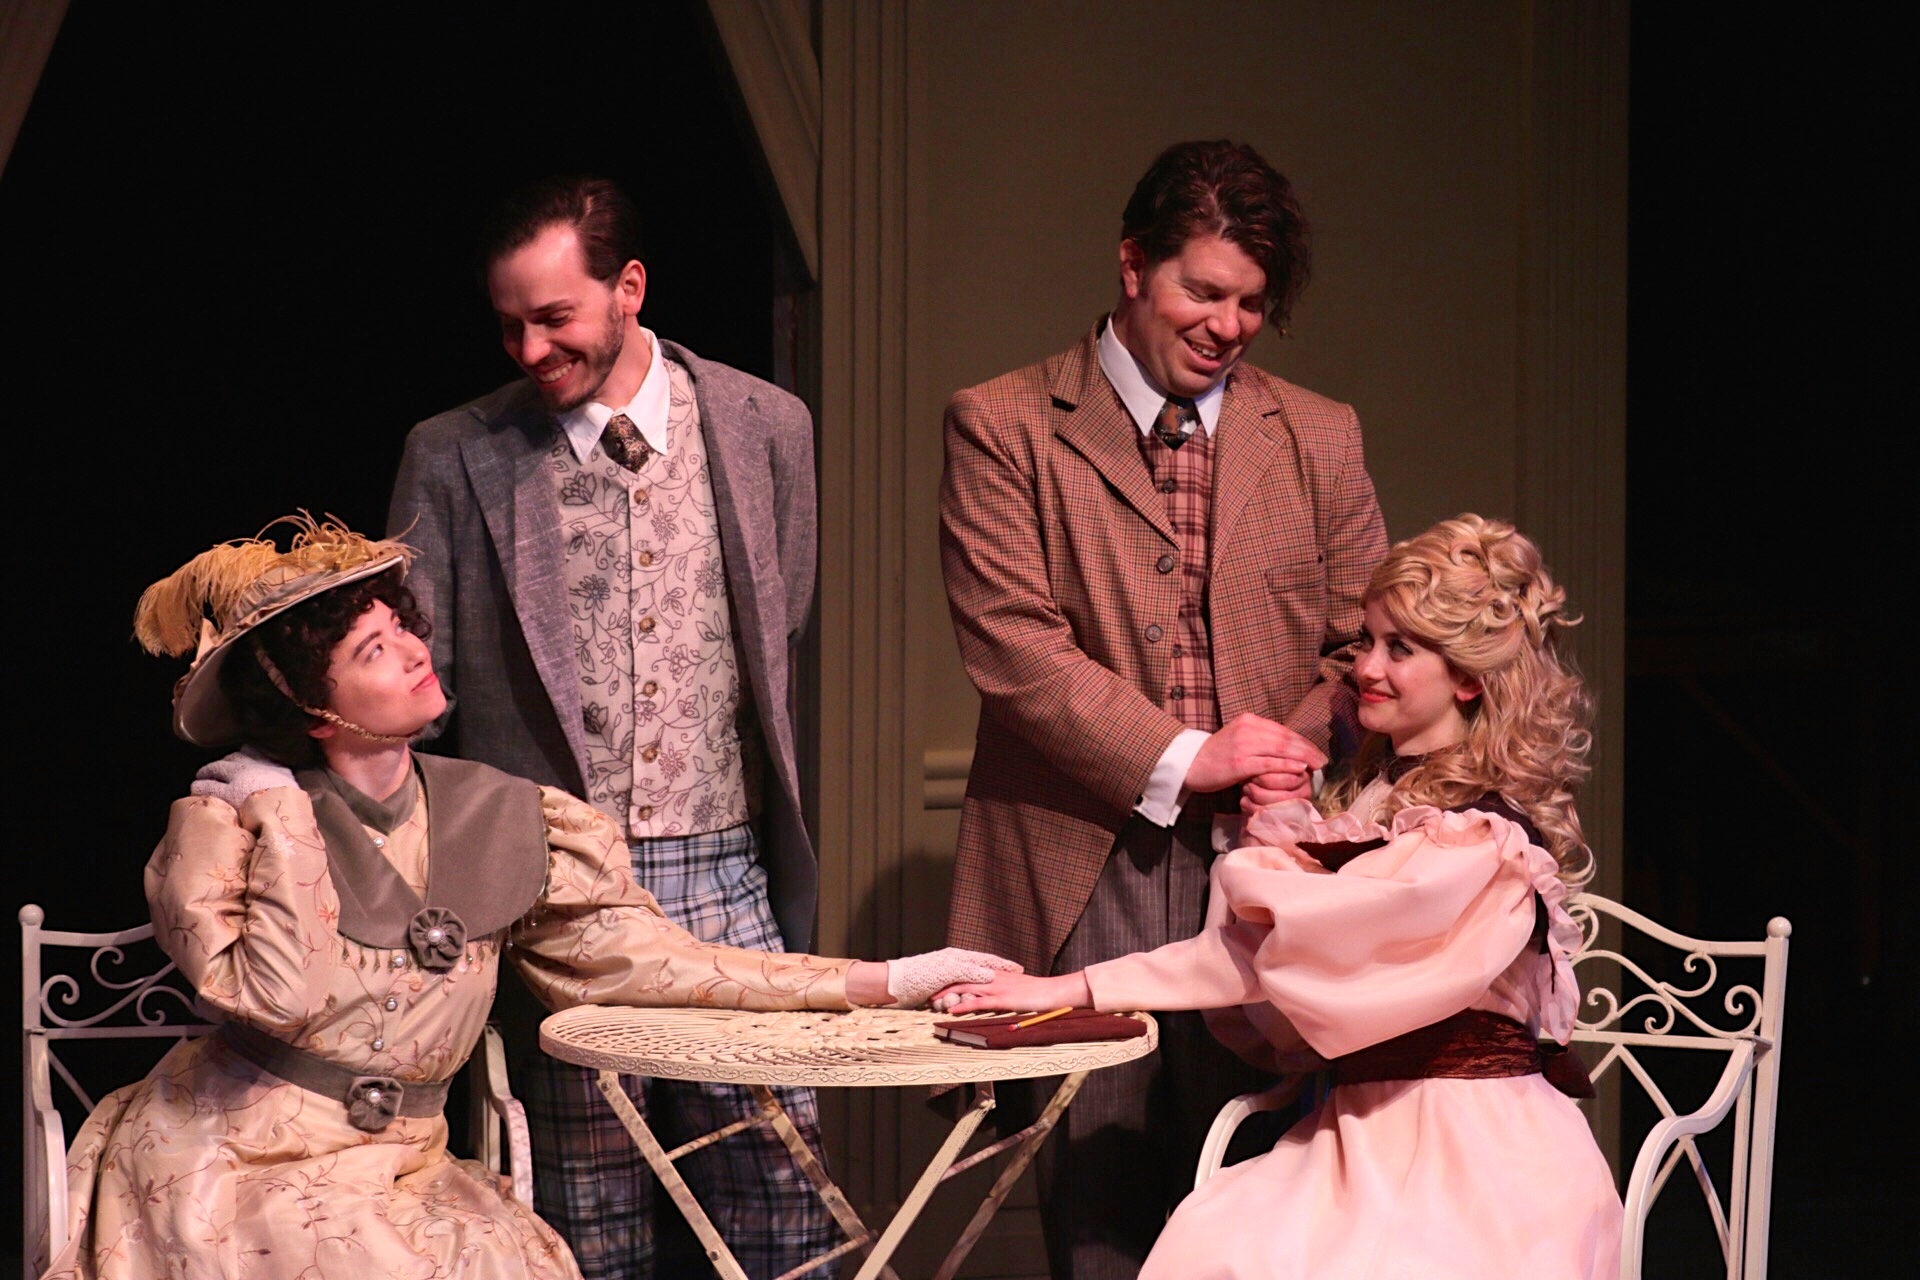 If it’s some airy and hilarious comedy you need to brighten your day, head for the Cottage Theatre and its production of “The Importance of Being Earnest”